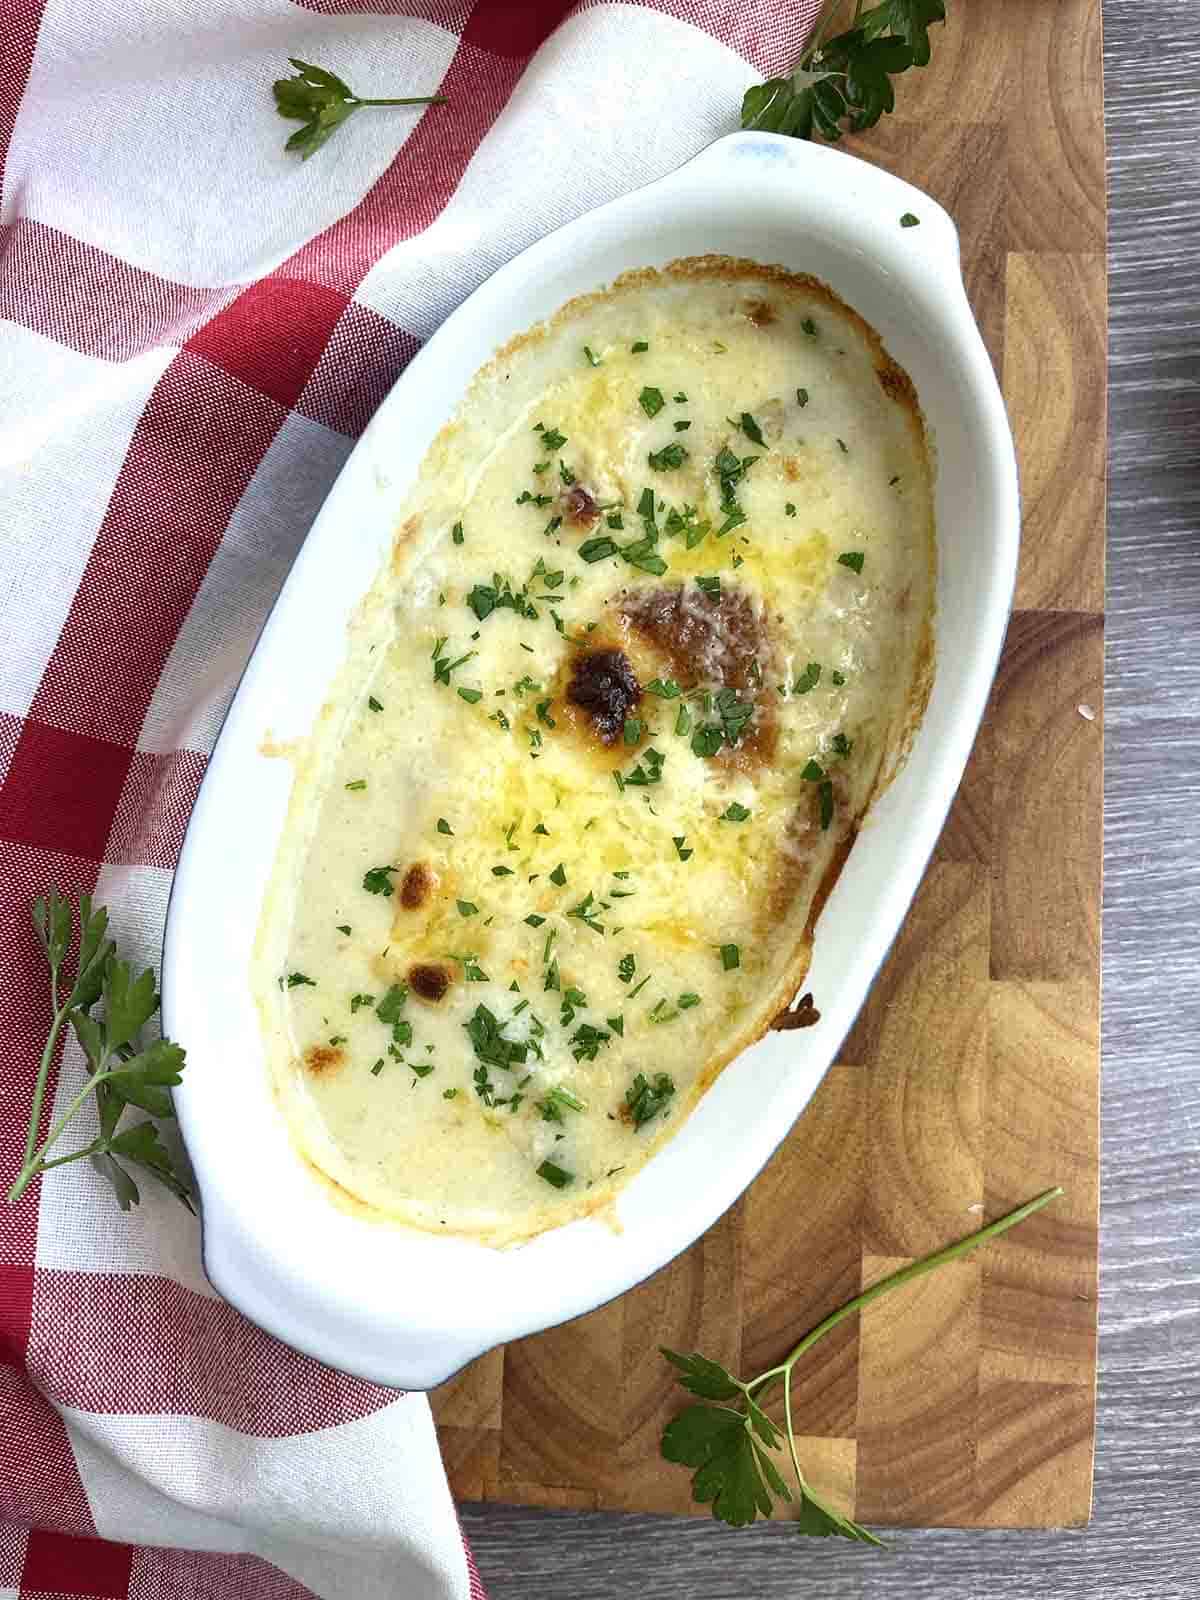 fish mornay in a dish.